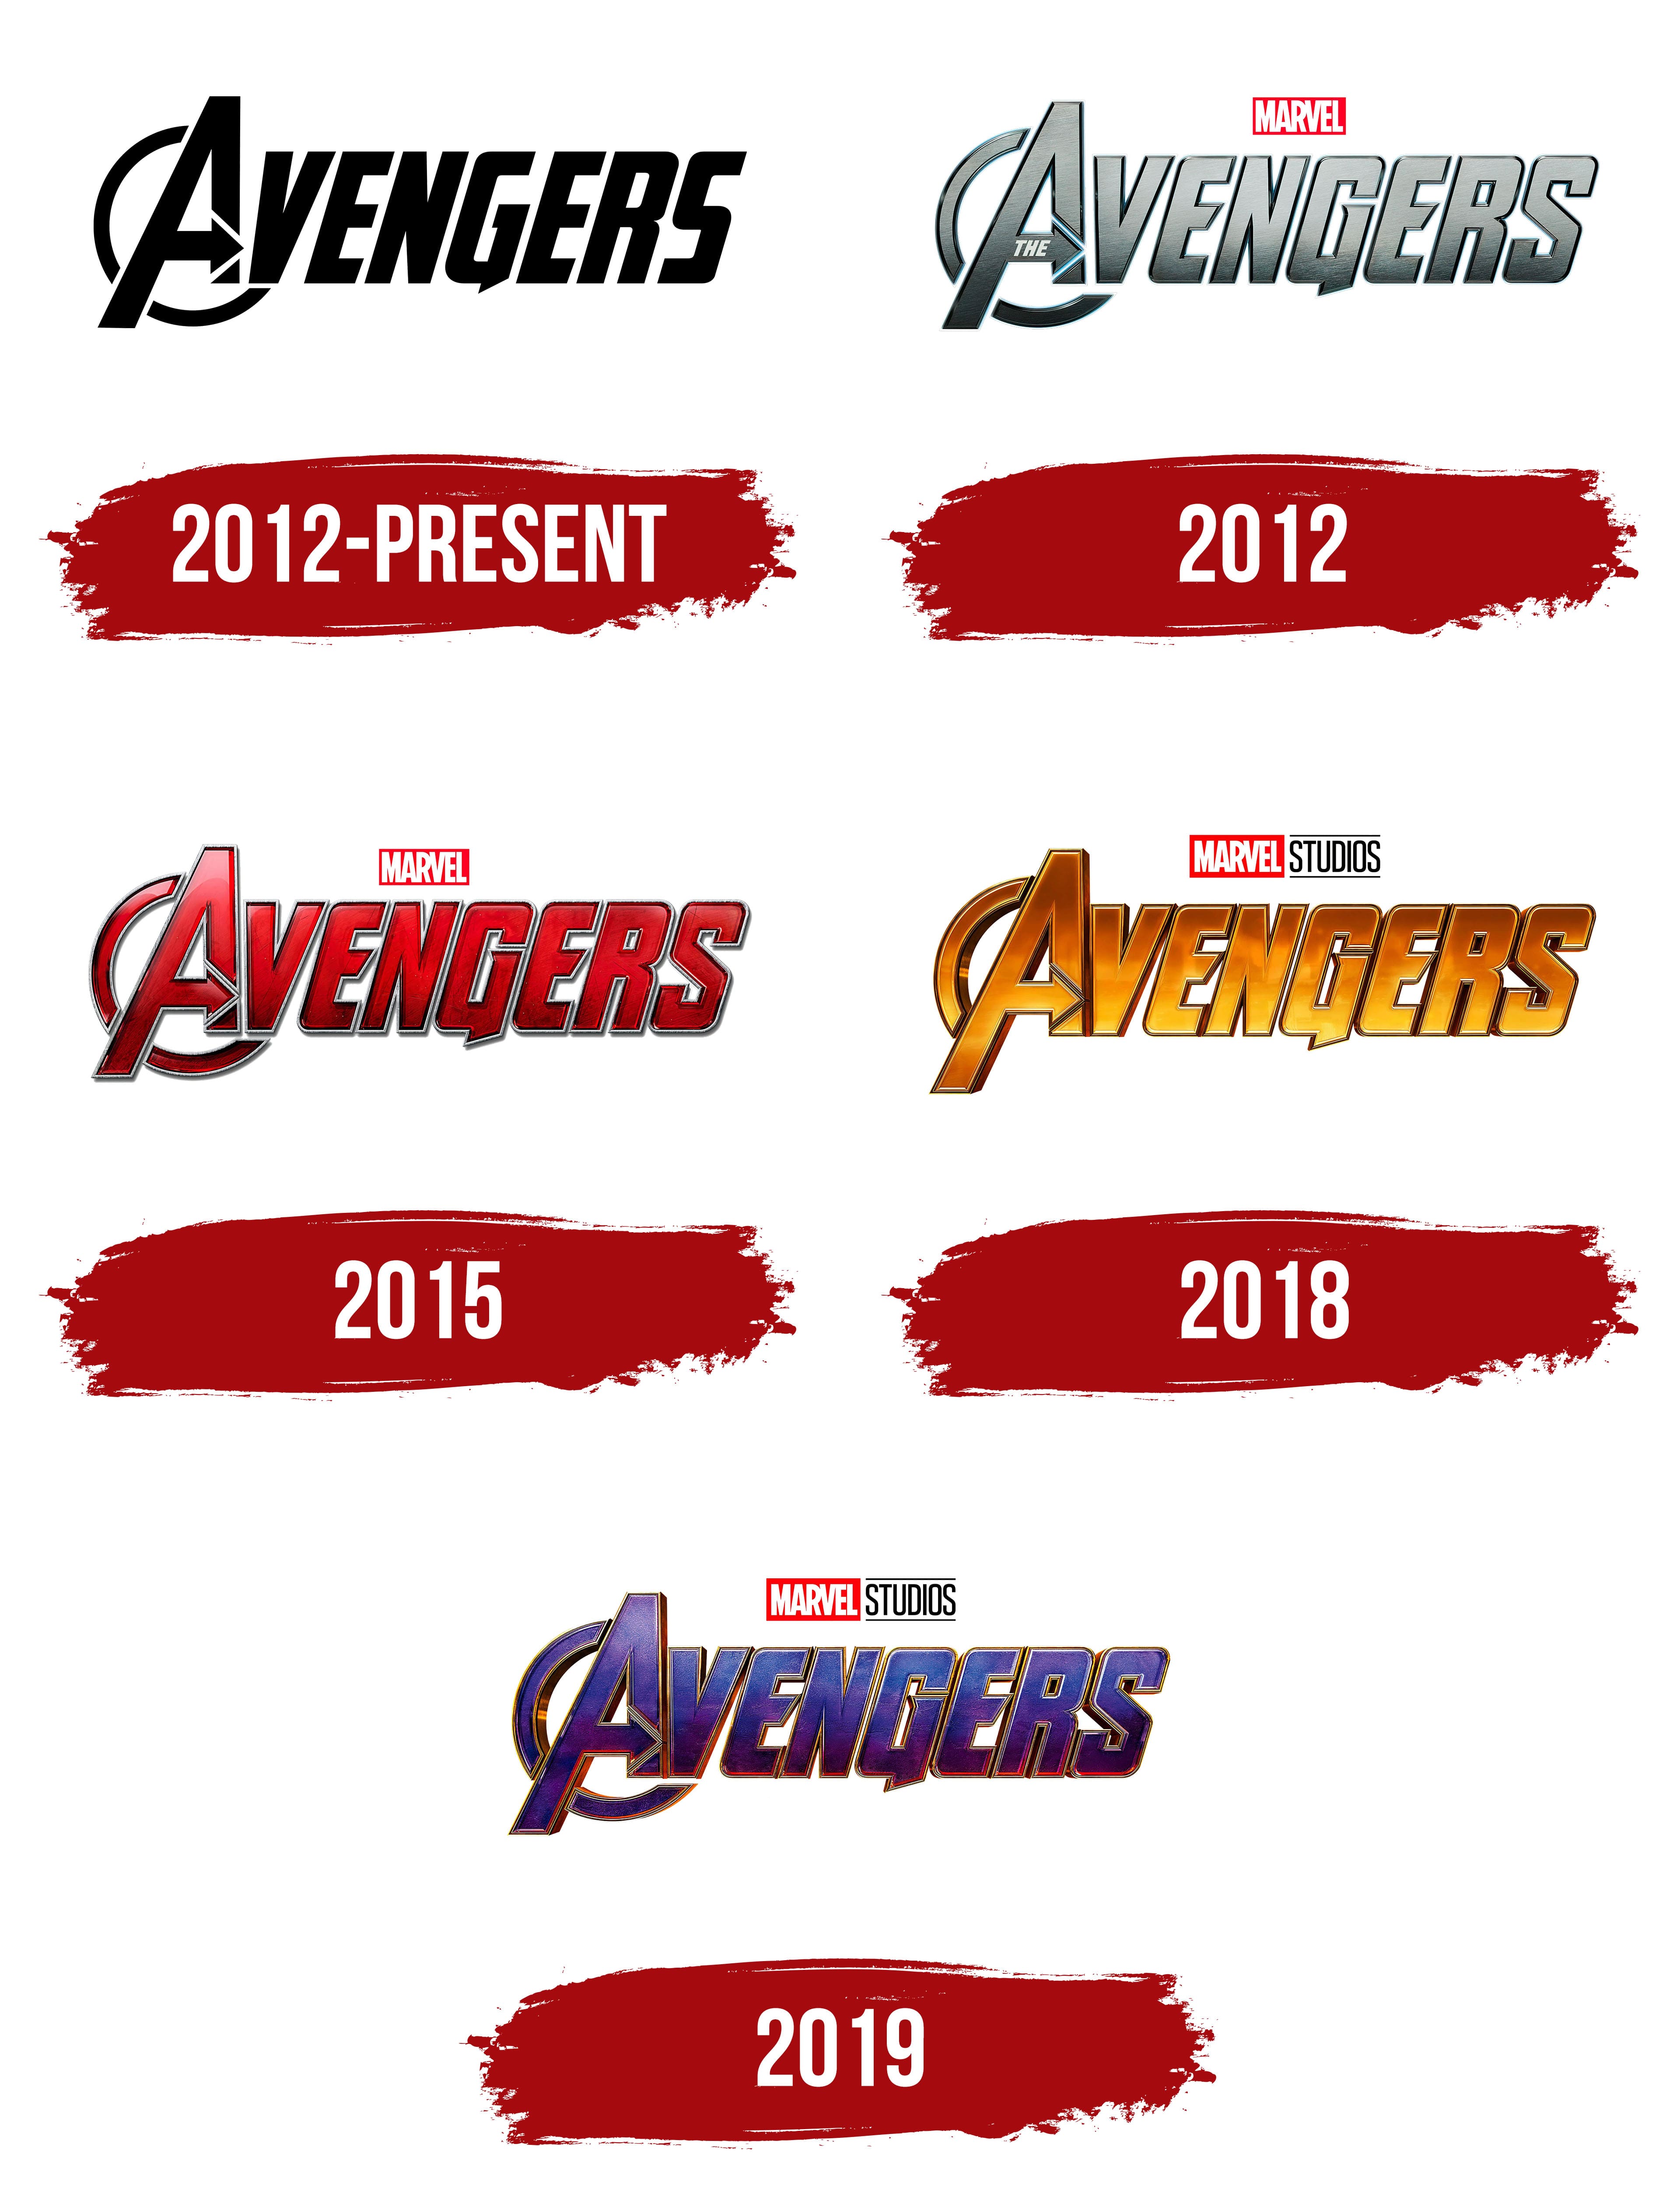 How To Draw The Avengers Logo | Drawing Logo Easy Step By Step - YouTube